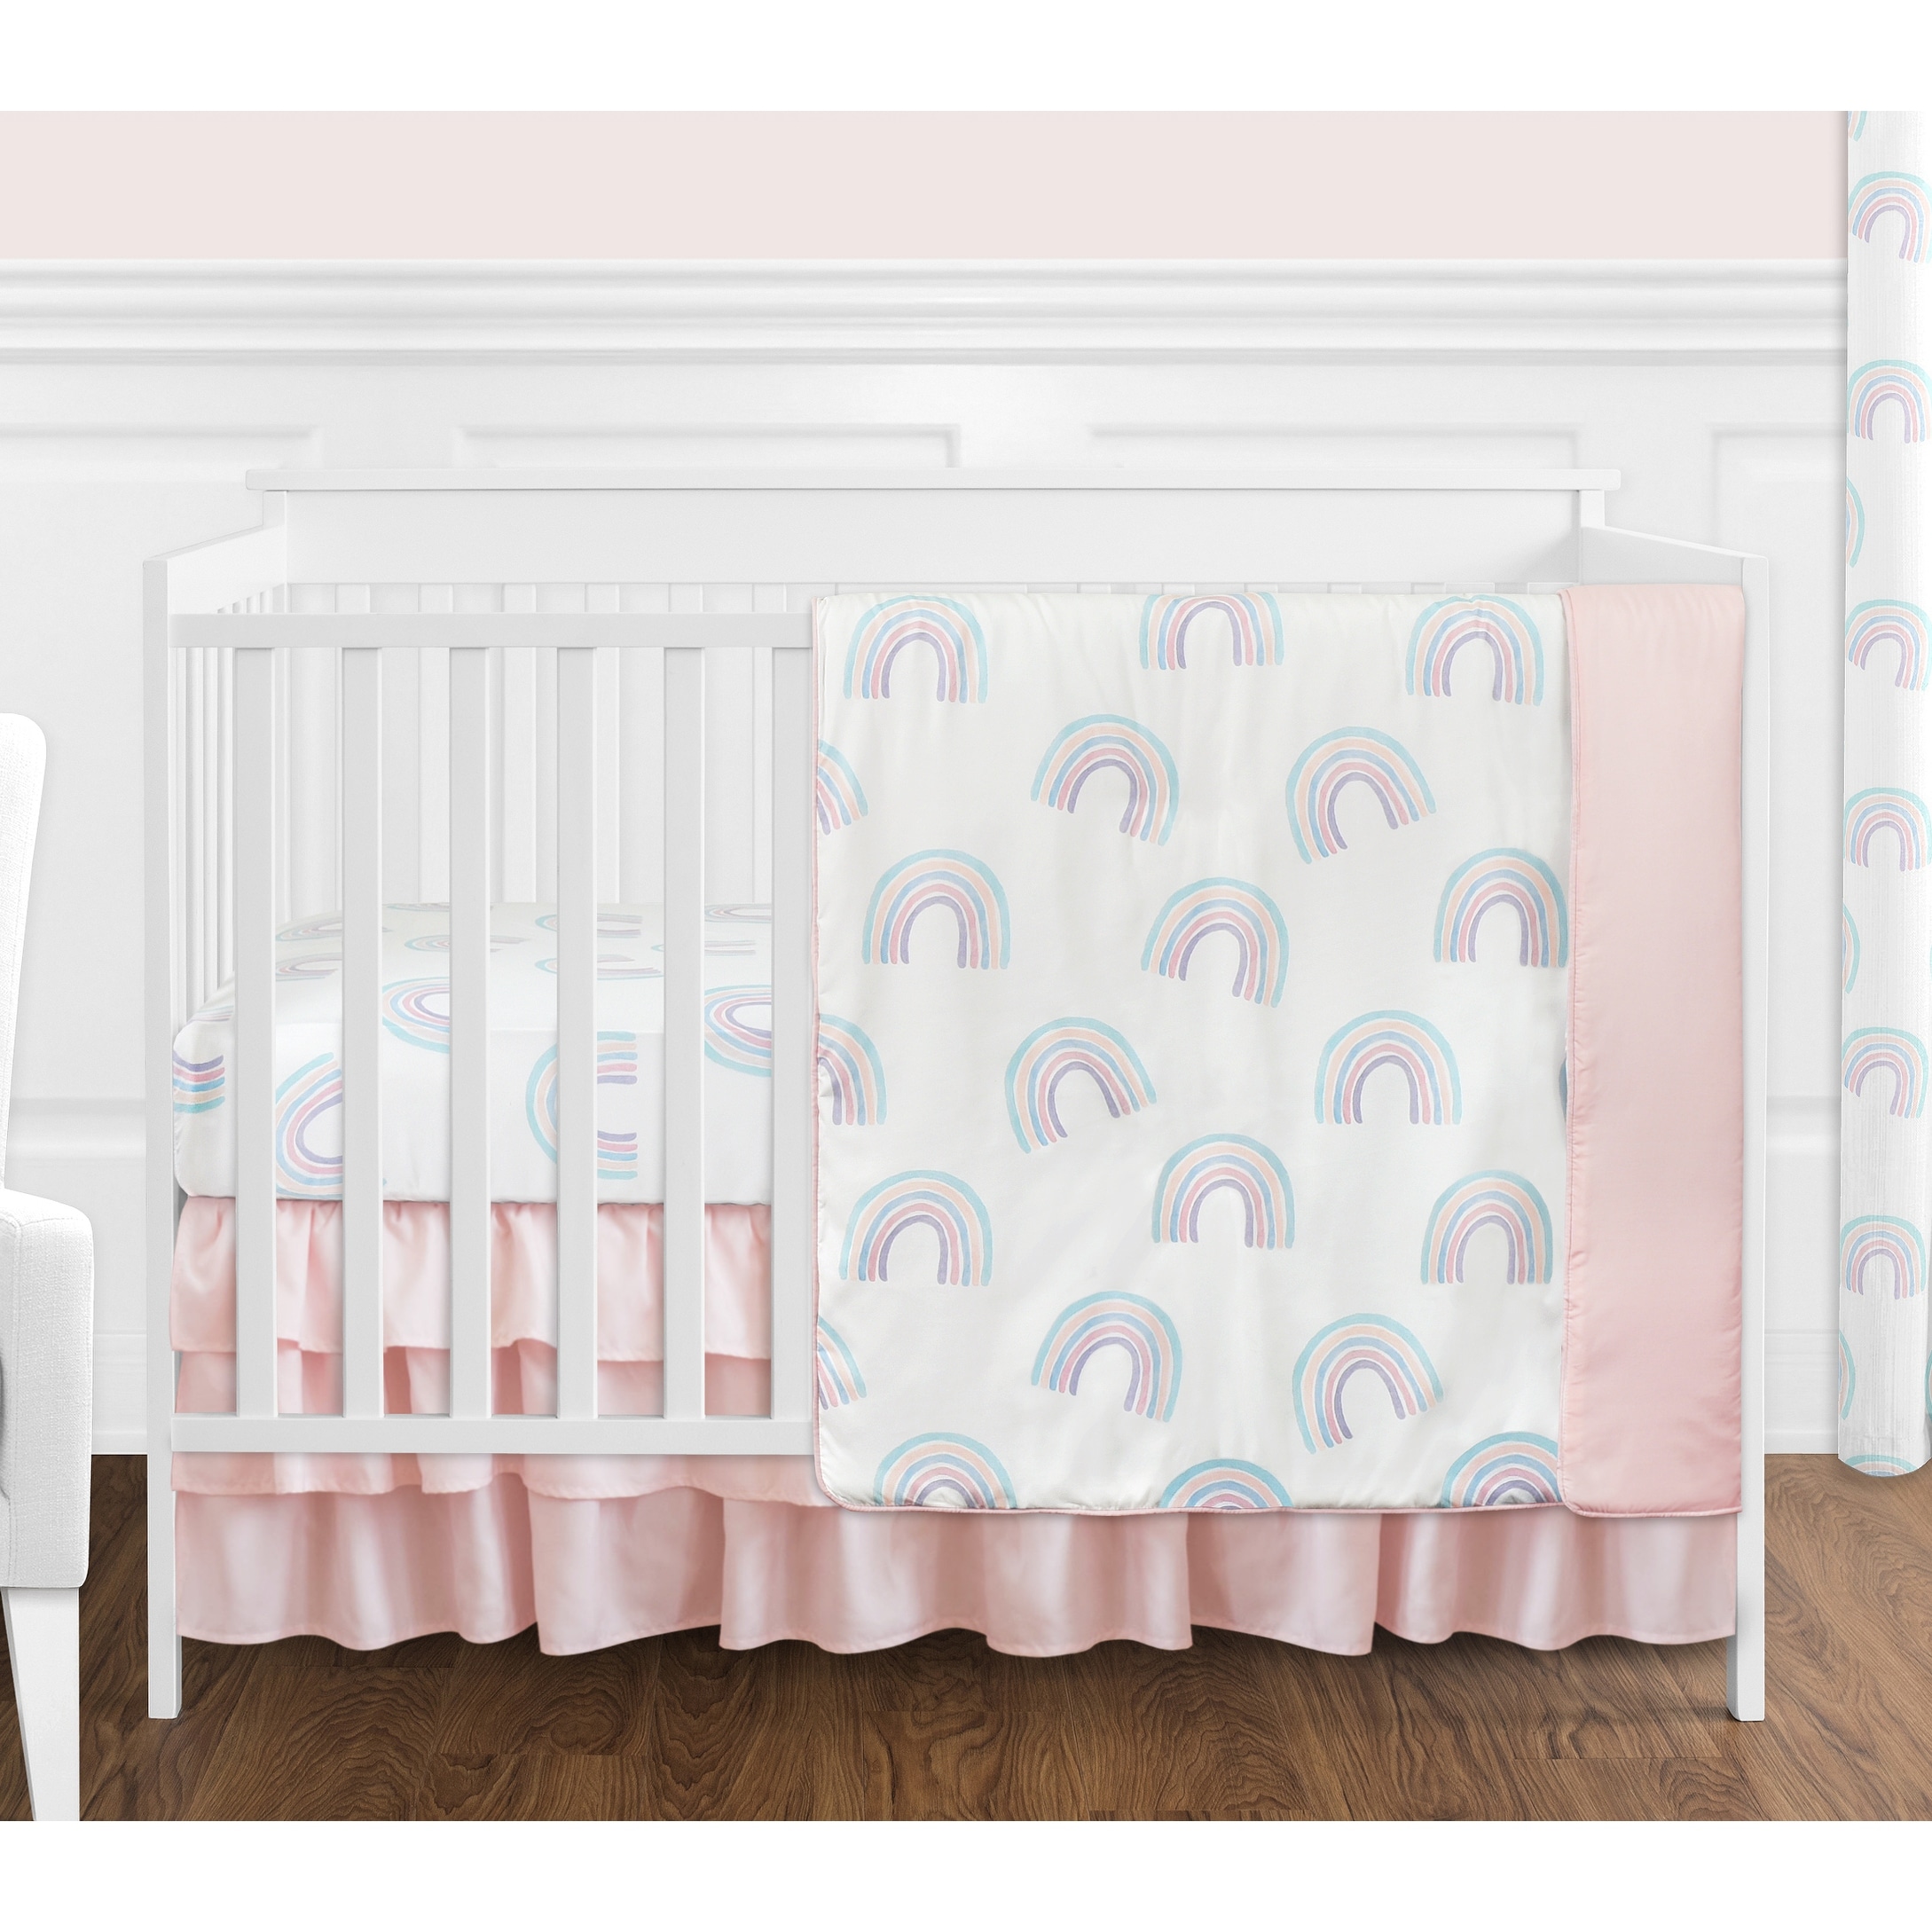 https://ak1.ostkcdn.com/images/products/is/images/direct/d919218a4034c98a3d7a6f6613a2ac13cc29618b/Pastel-Rainbow-Collection-Girl-4-piece-Nursery-Crib-Bedding-Set---Blush-Pink%2C-Purple%2C-Teal%2C-Blue-and-White.jpg